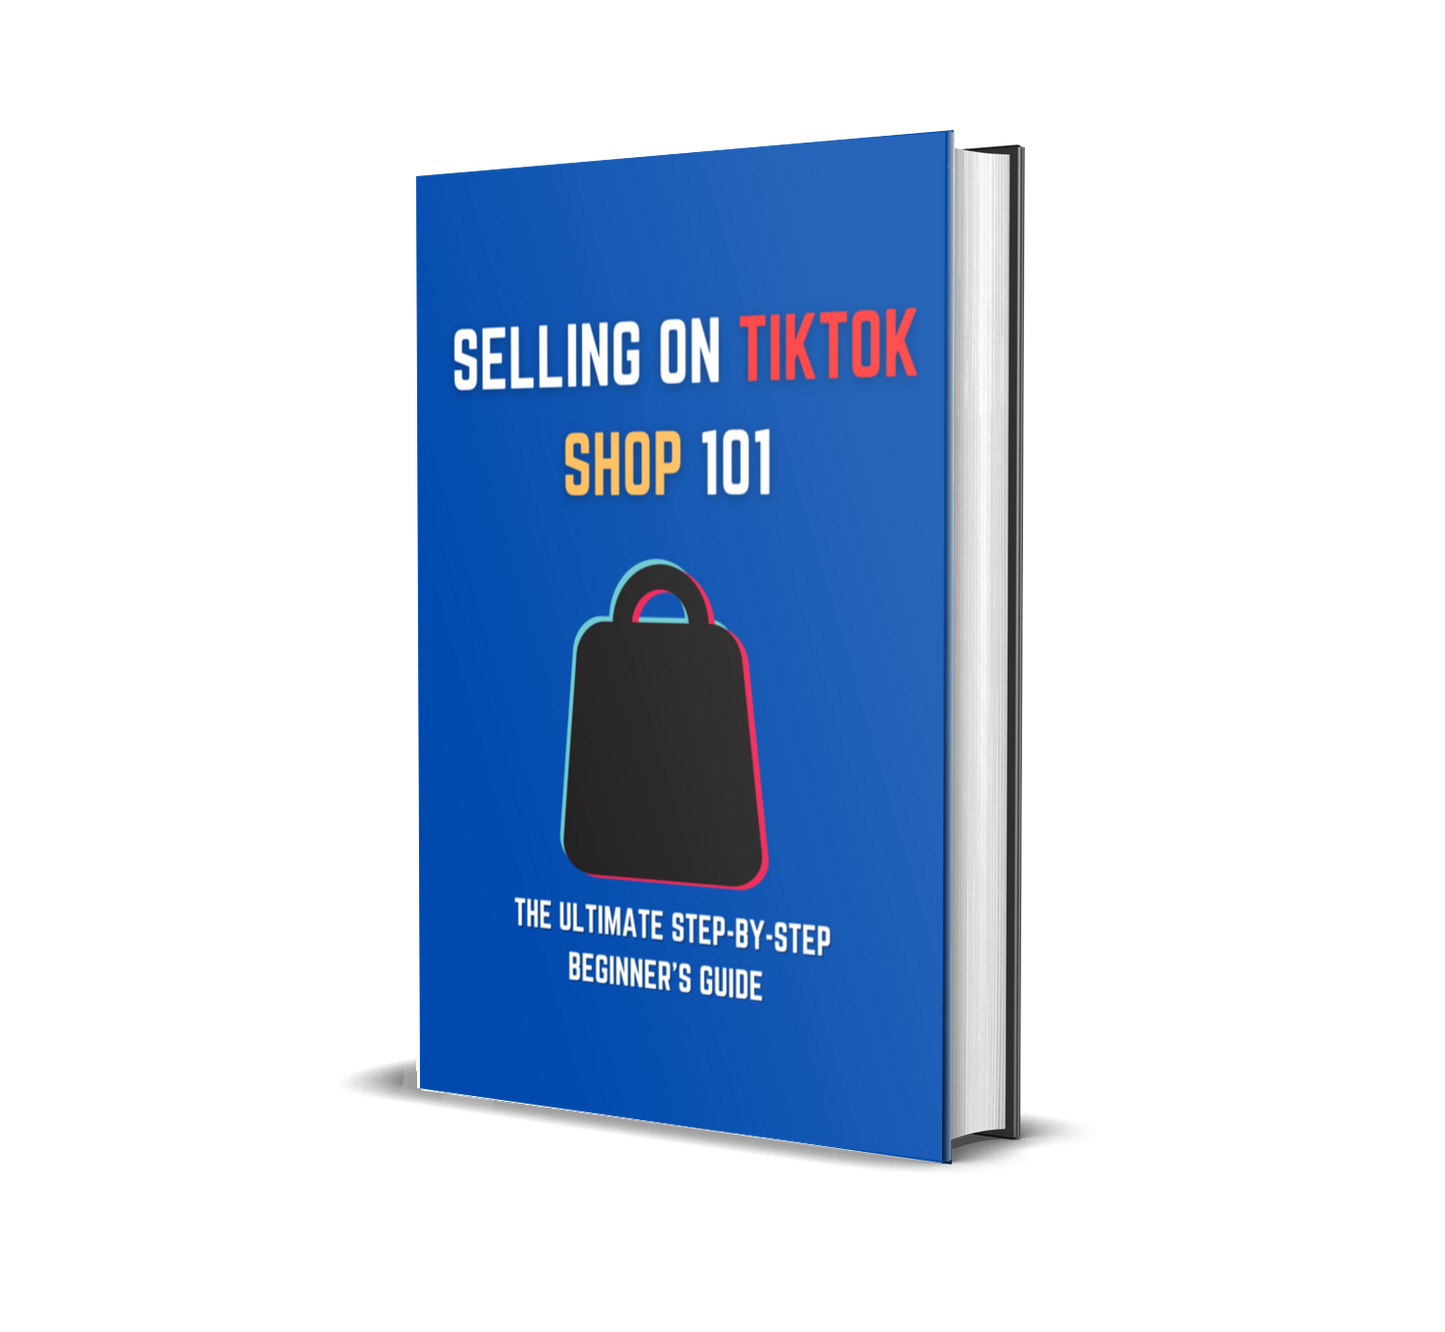 🚀 Master the Art of Selling on TikTok Shop with "Selling on TikTok Shop 101🚀